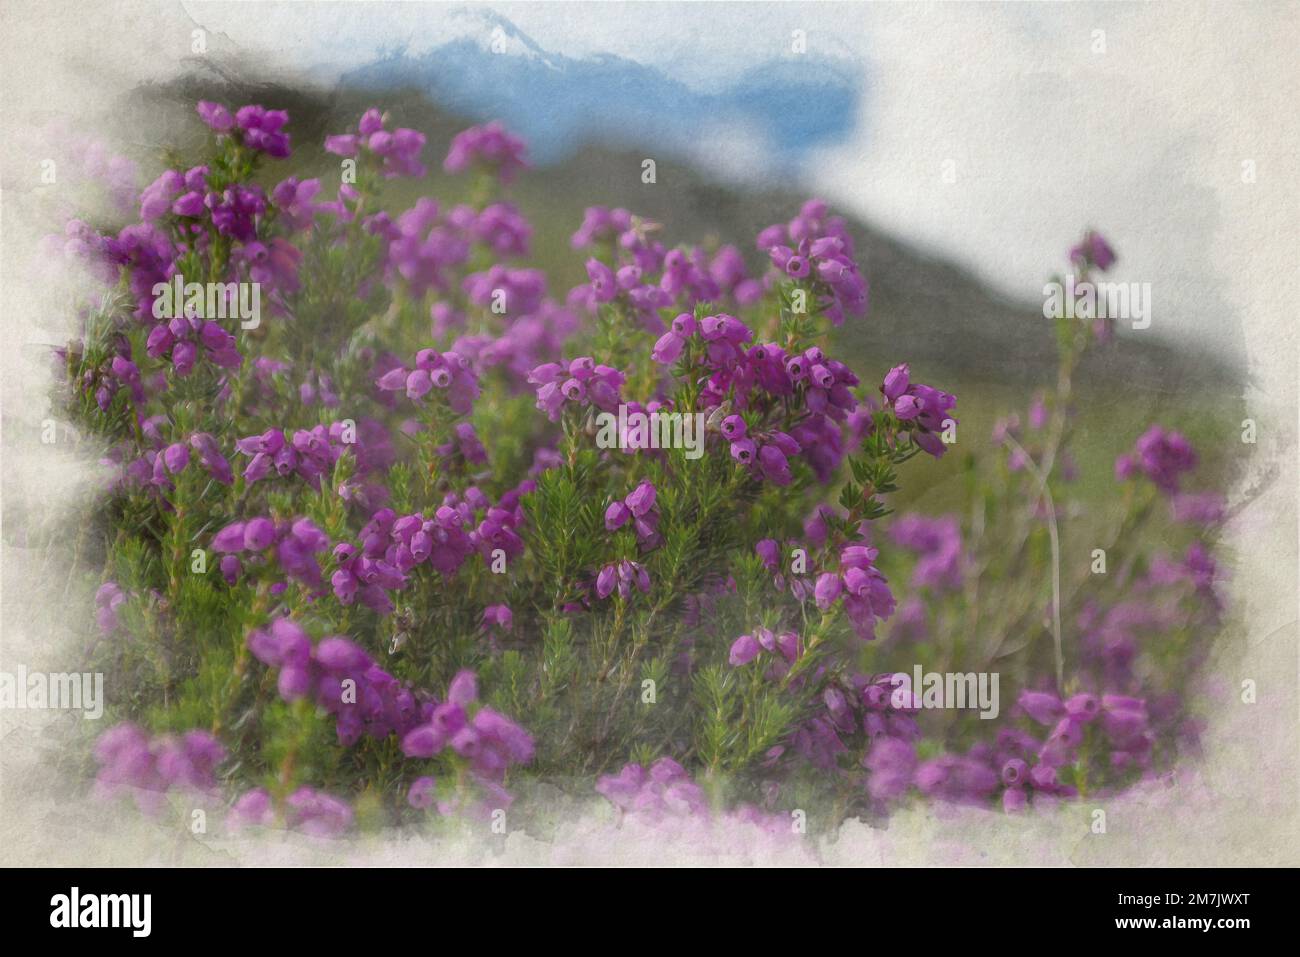 Digitalwatercolor painting of purple Bell Heather in full bloom against a blurred mountain background. Stock Photo